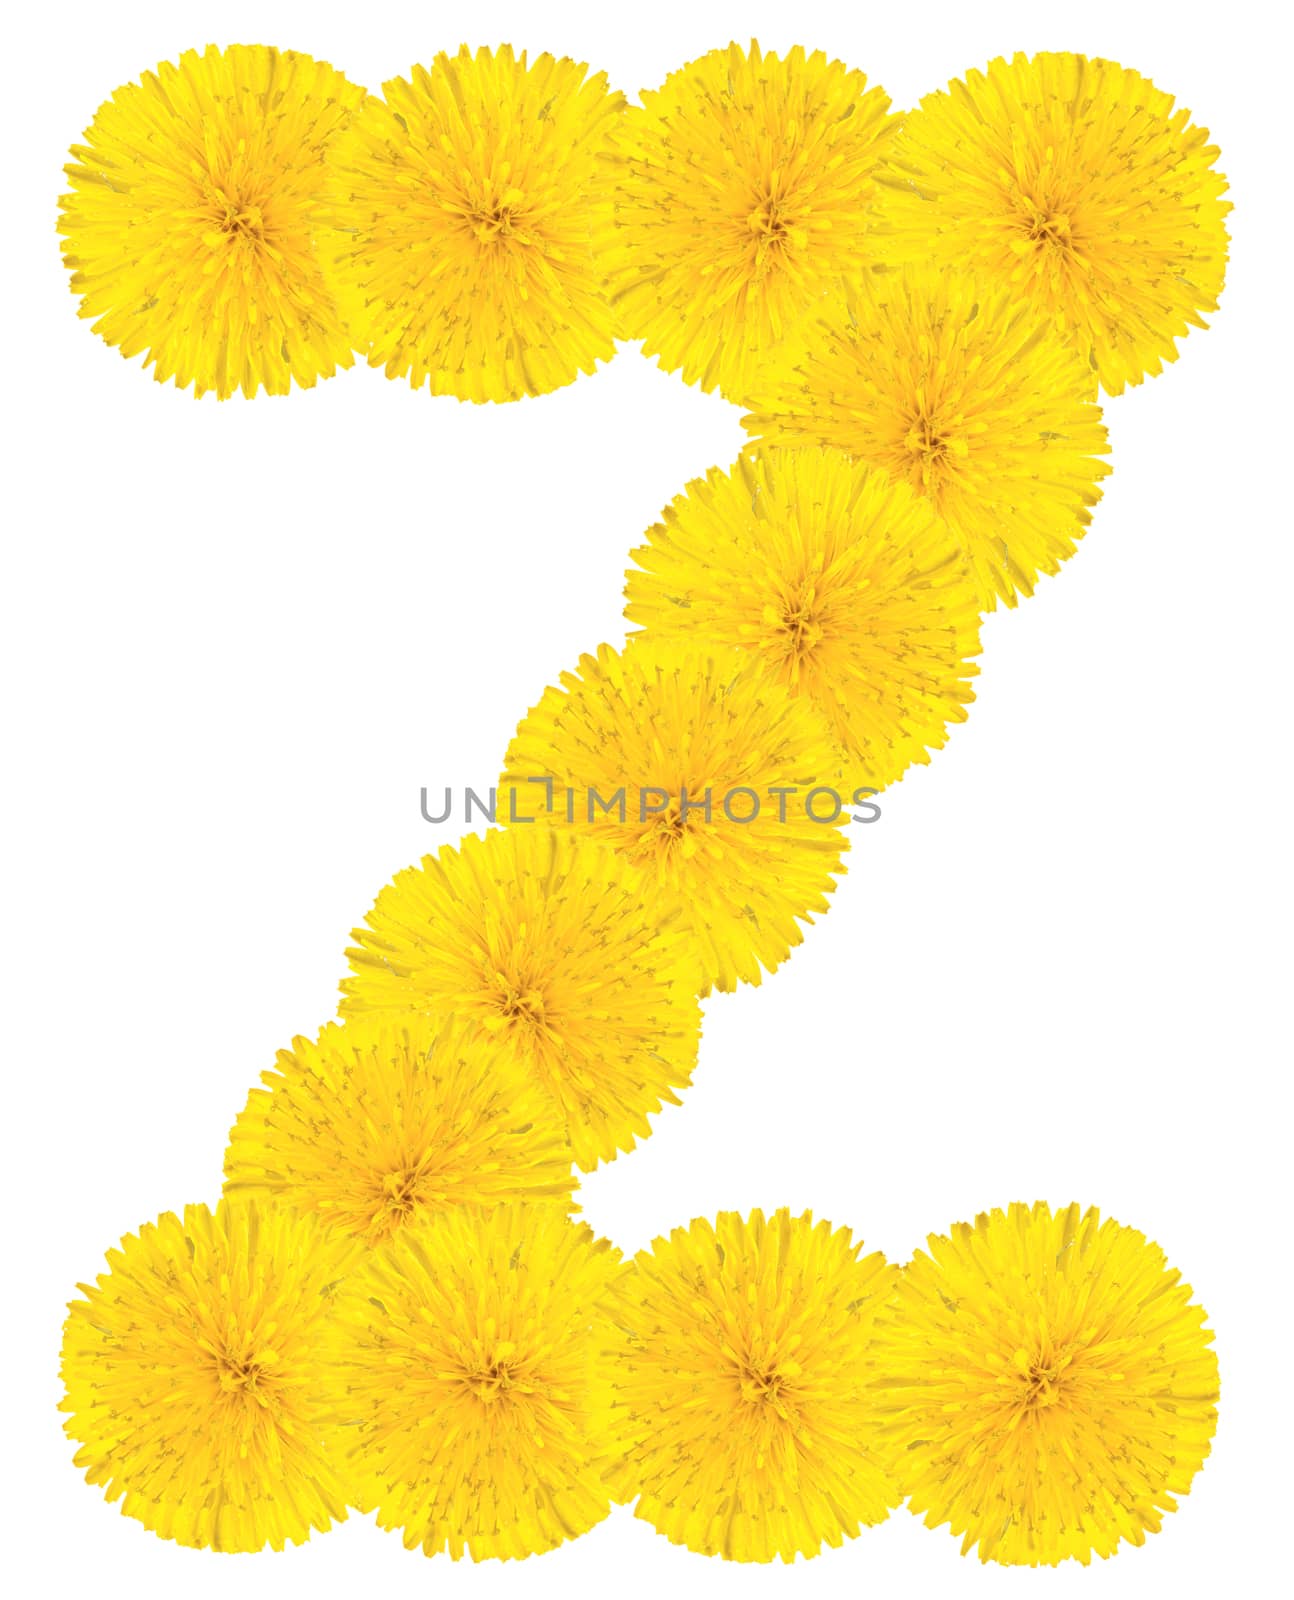 Letter Z made from dandelion flowers isolated on white background